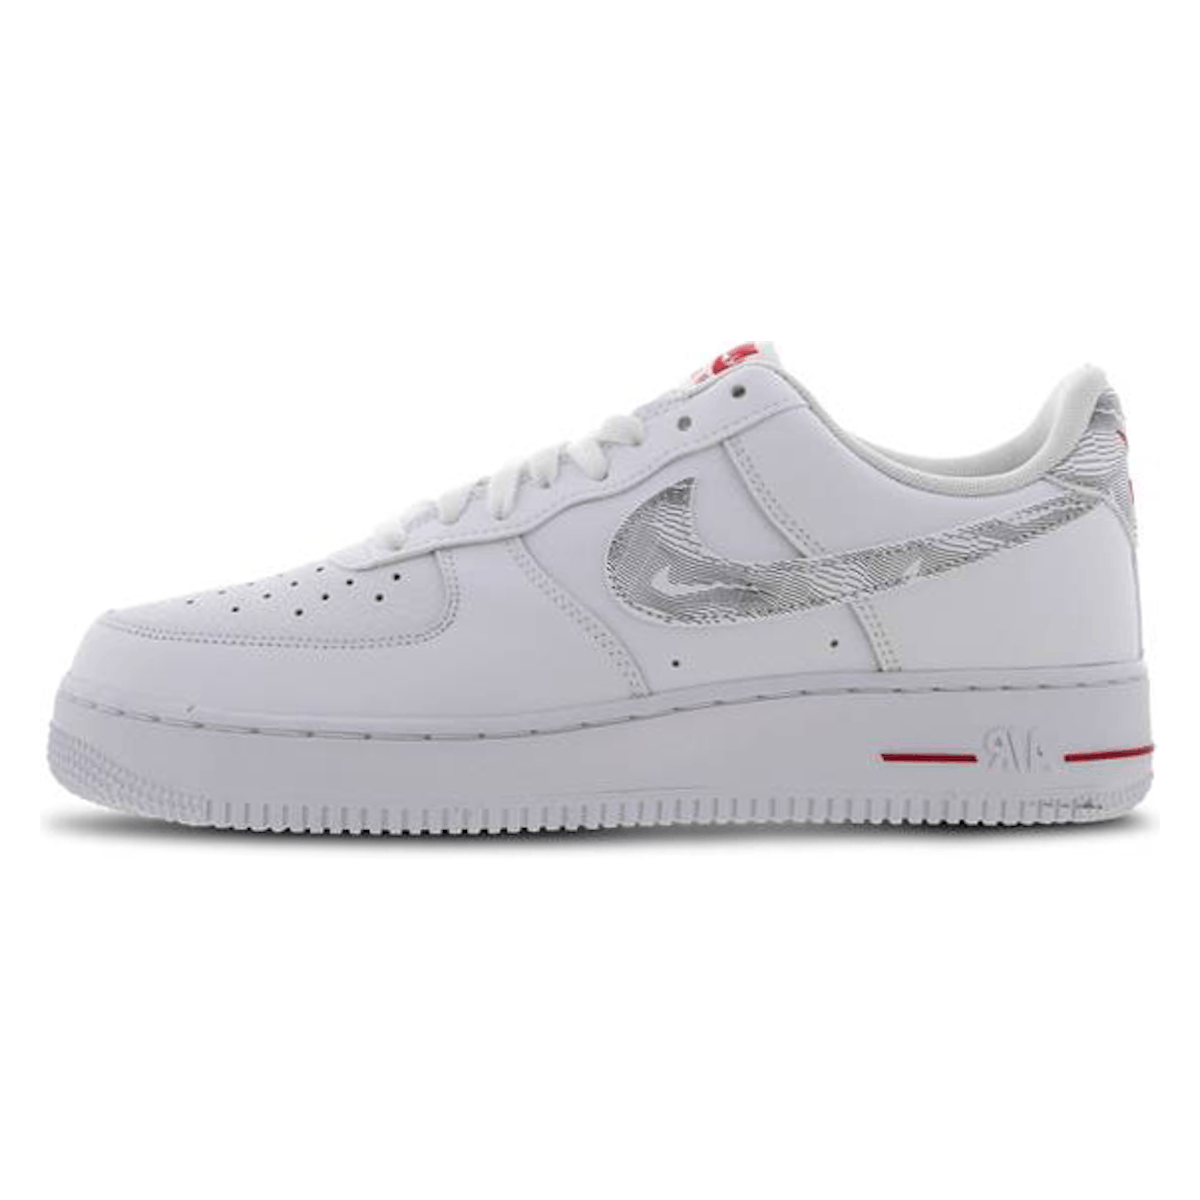 Nike Air Force 1 Low "Topography"